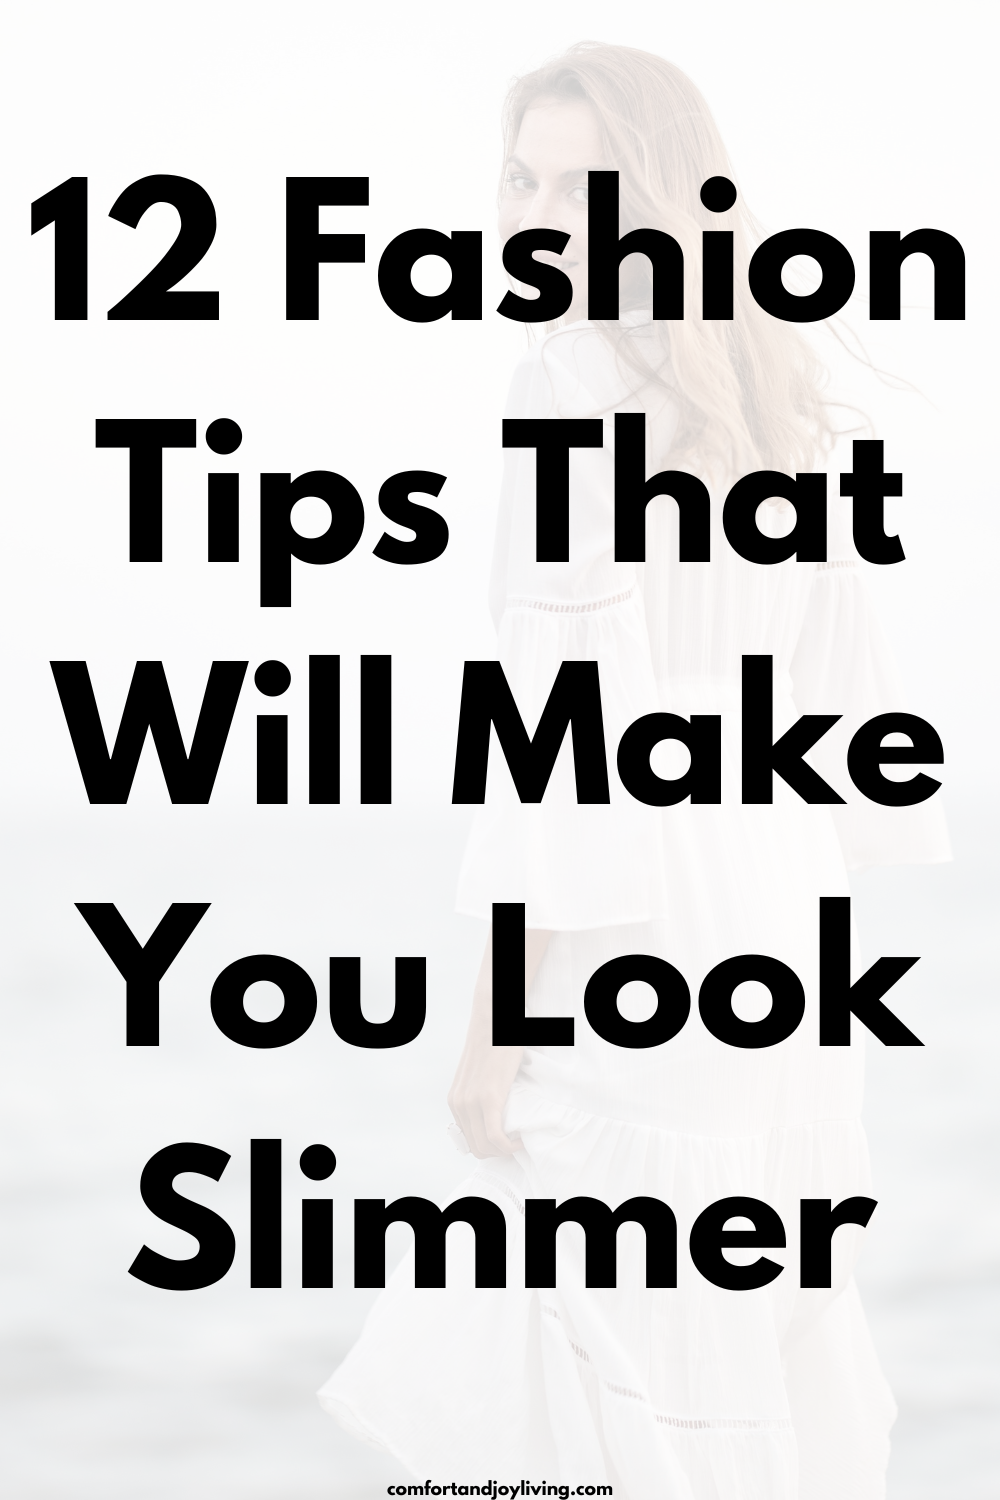 12 Fashion Tips That Will Make You Look Slimmer